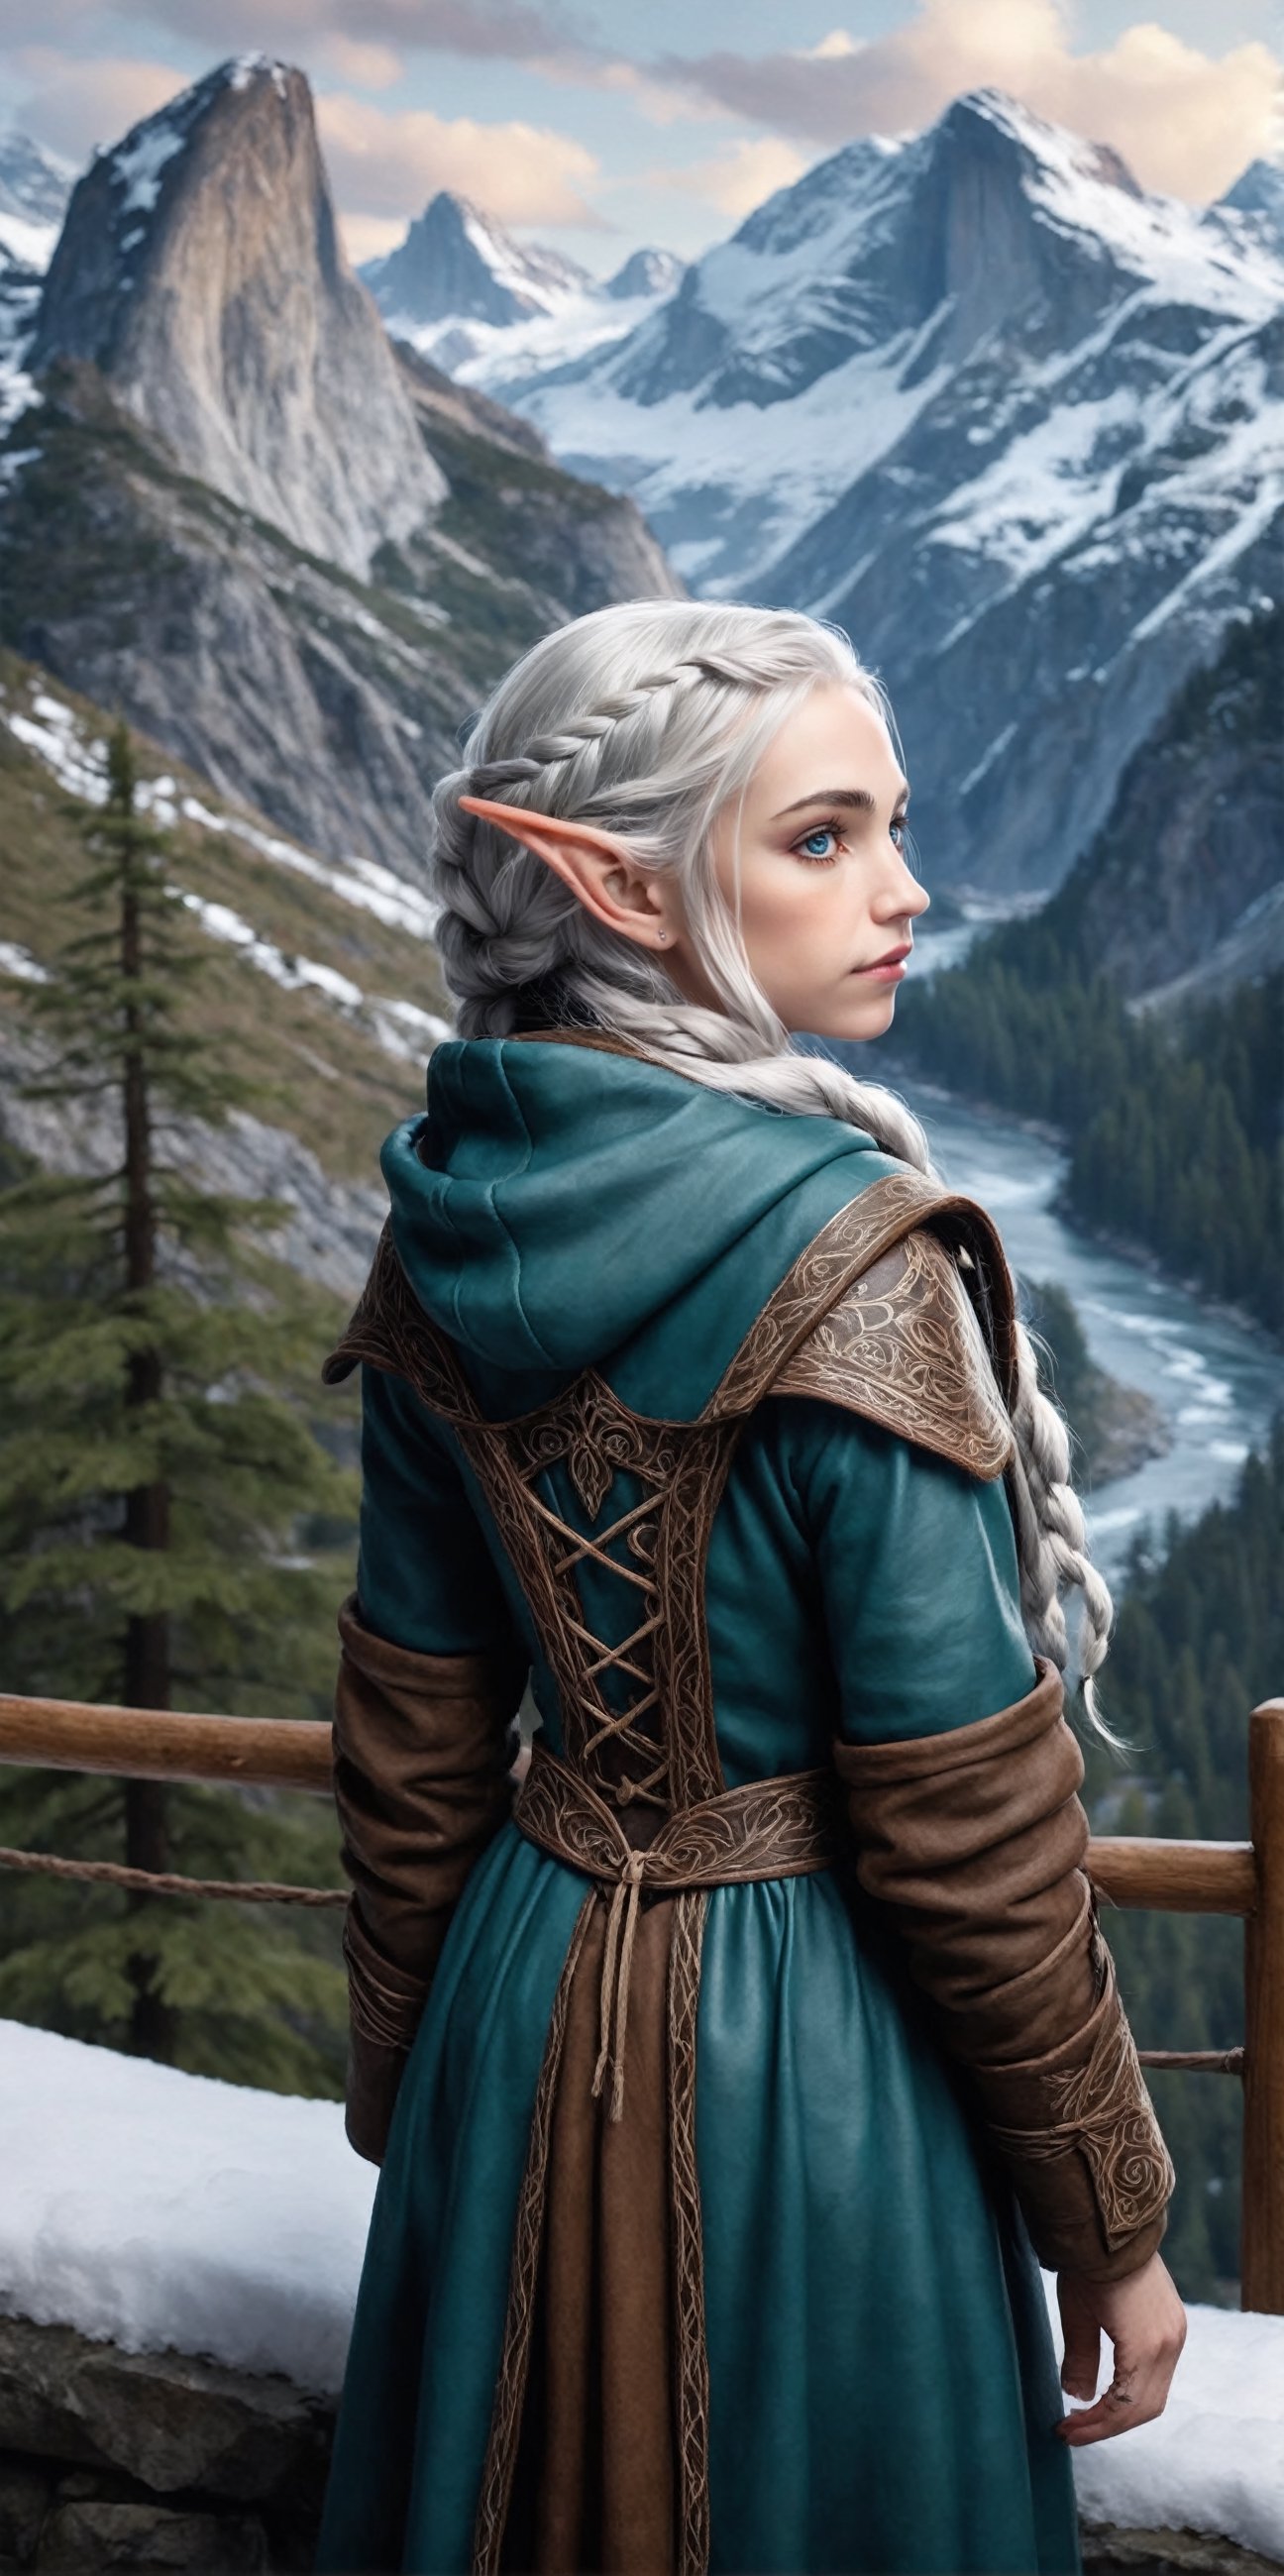 Extreme detailed,ultra Realistic,
beautiful young ELF lady,platinum silver shining hair, long elvish braid, side braid,Beautiful crystal blue eyes,
Wearing leather tunic, hooded cloak, animal fur hood, intricate clothing, animal fur clothing, dark clothing, waistband, scarf, soft smile, bending posture, looking into the distance, 
snowy mountain scenery, overlooking valley, river, white clouds, seen from behind,ol1v1adunne,DonM3lv3sXL,niji6,perfect likeness of TaisaSDXL,y0sem1te